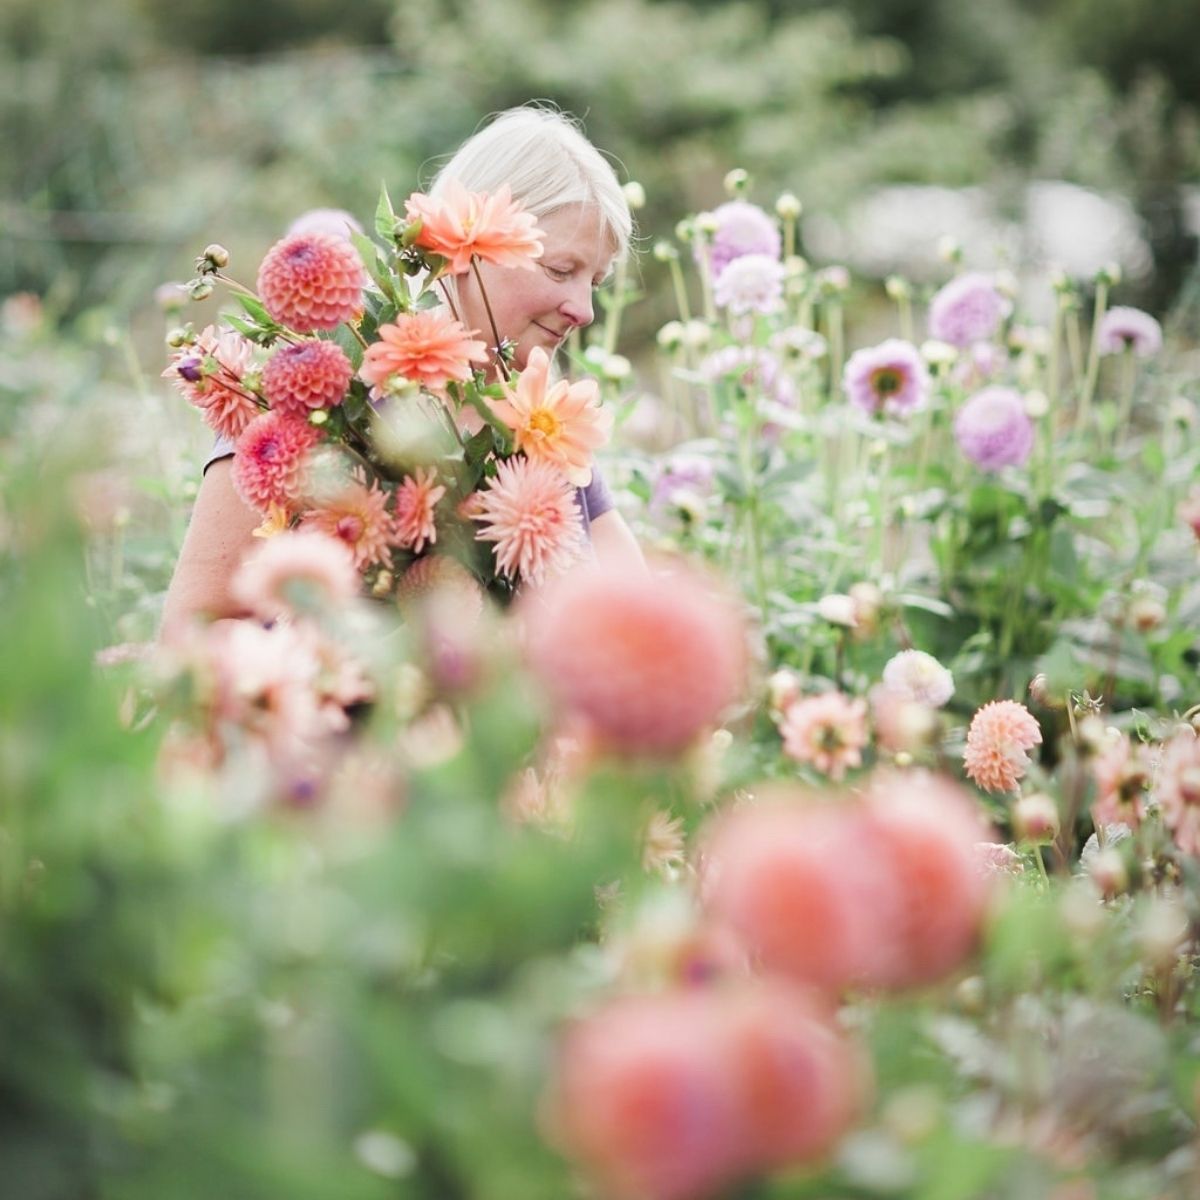 carol-from-carol-garden-in-this-floral-interview-article-on-thursd-2